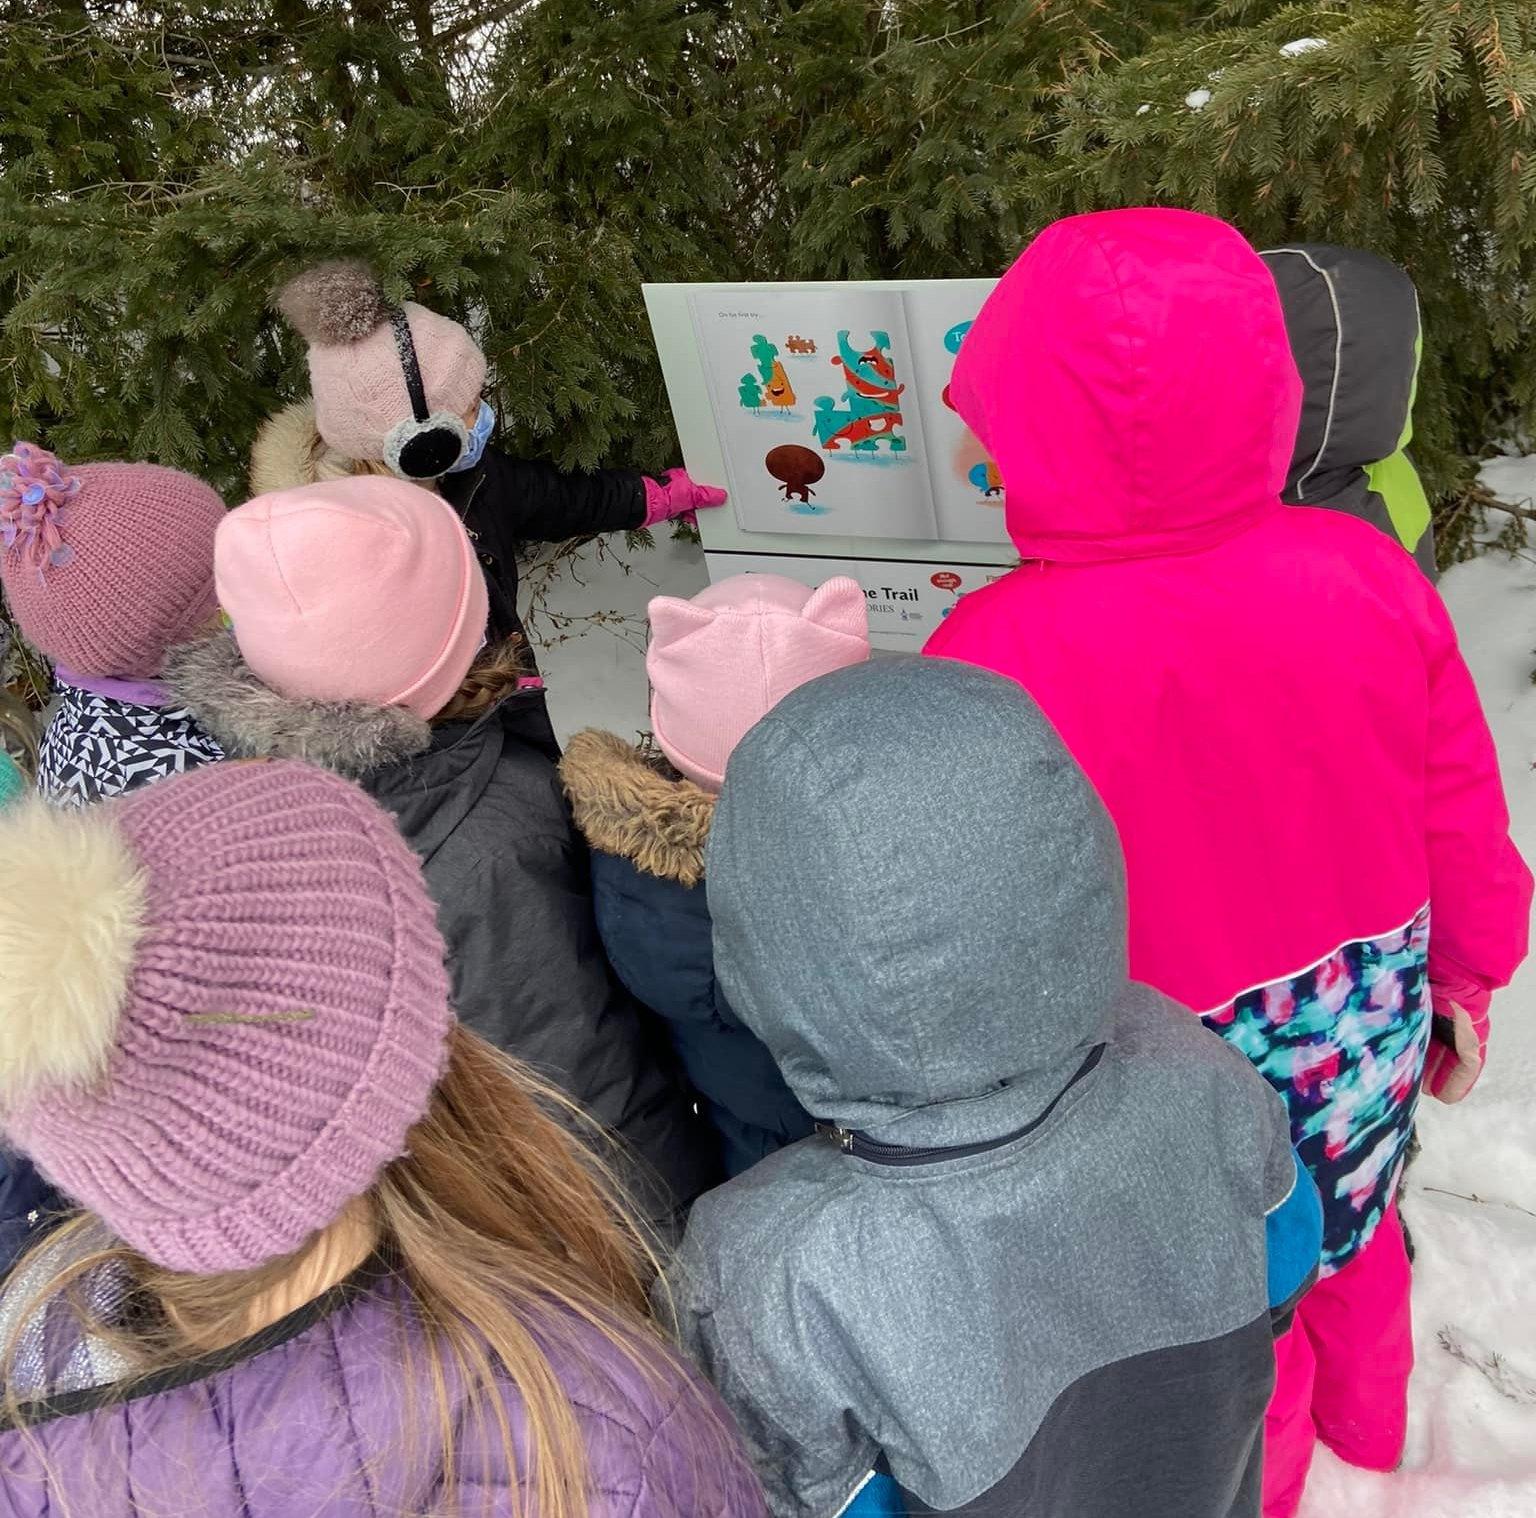 Image showing students wearing winter gear looking at sign containing part of a story outdoors